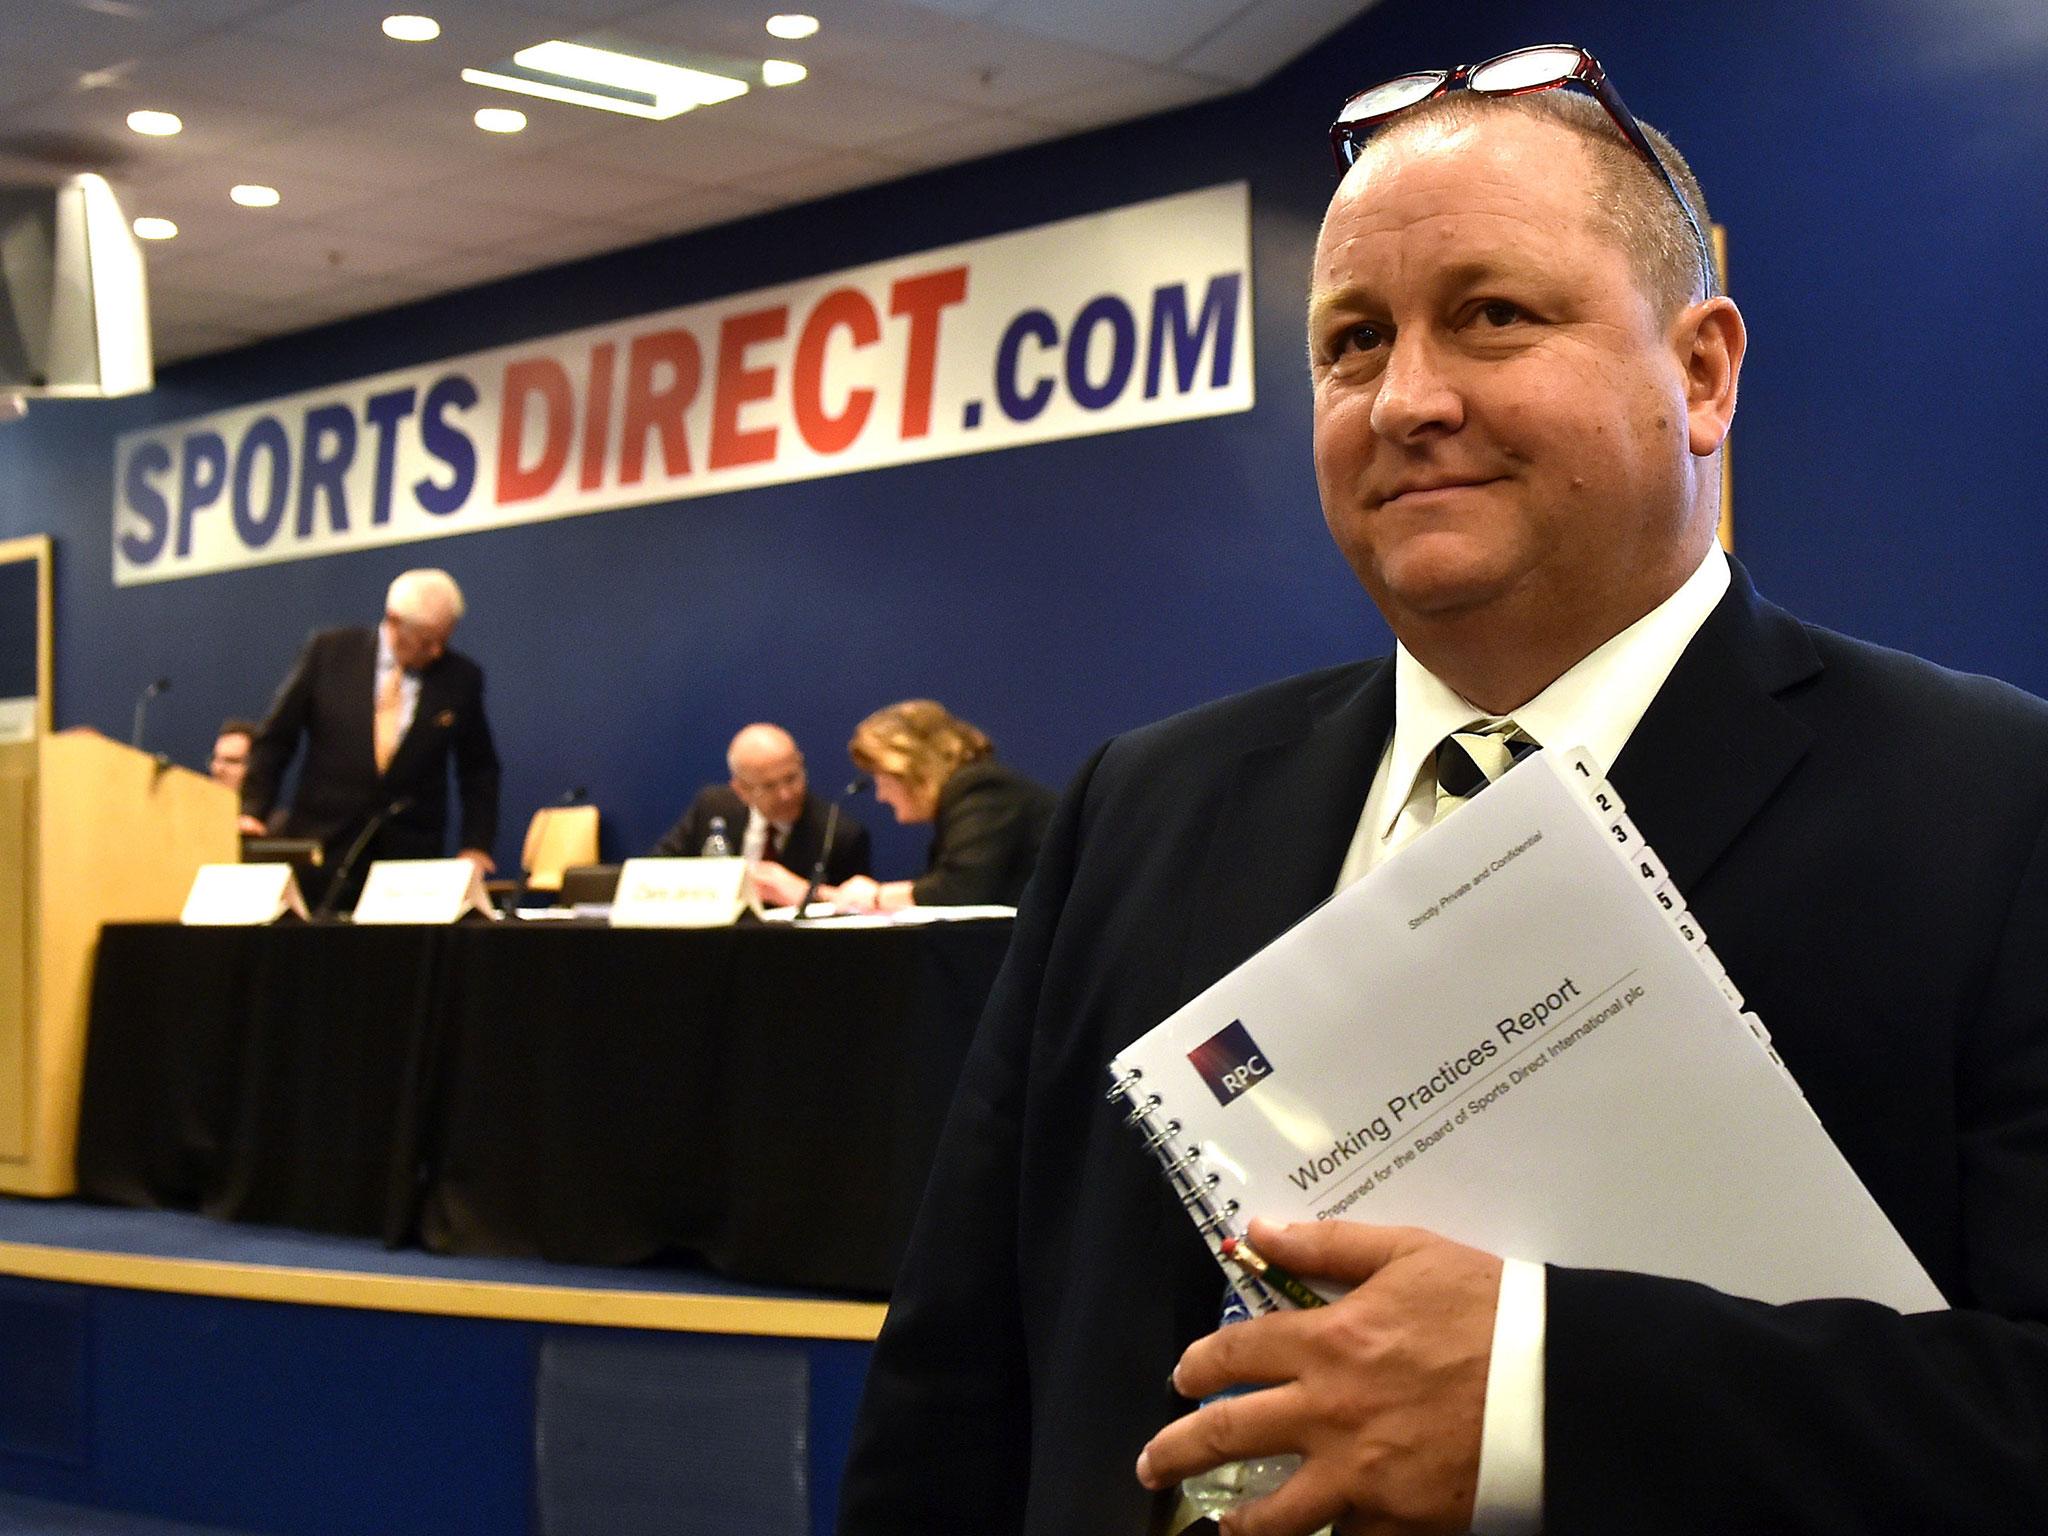 Mike Ashley: it appears the Sports Direct chief has realised that numerous scandals have cost him money